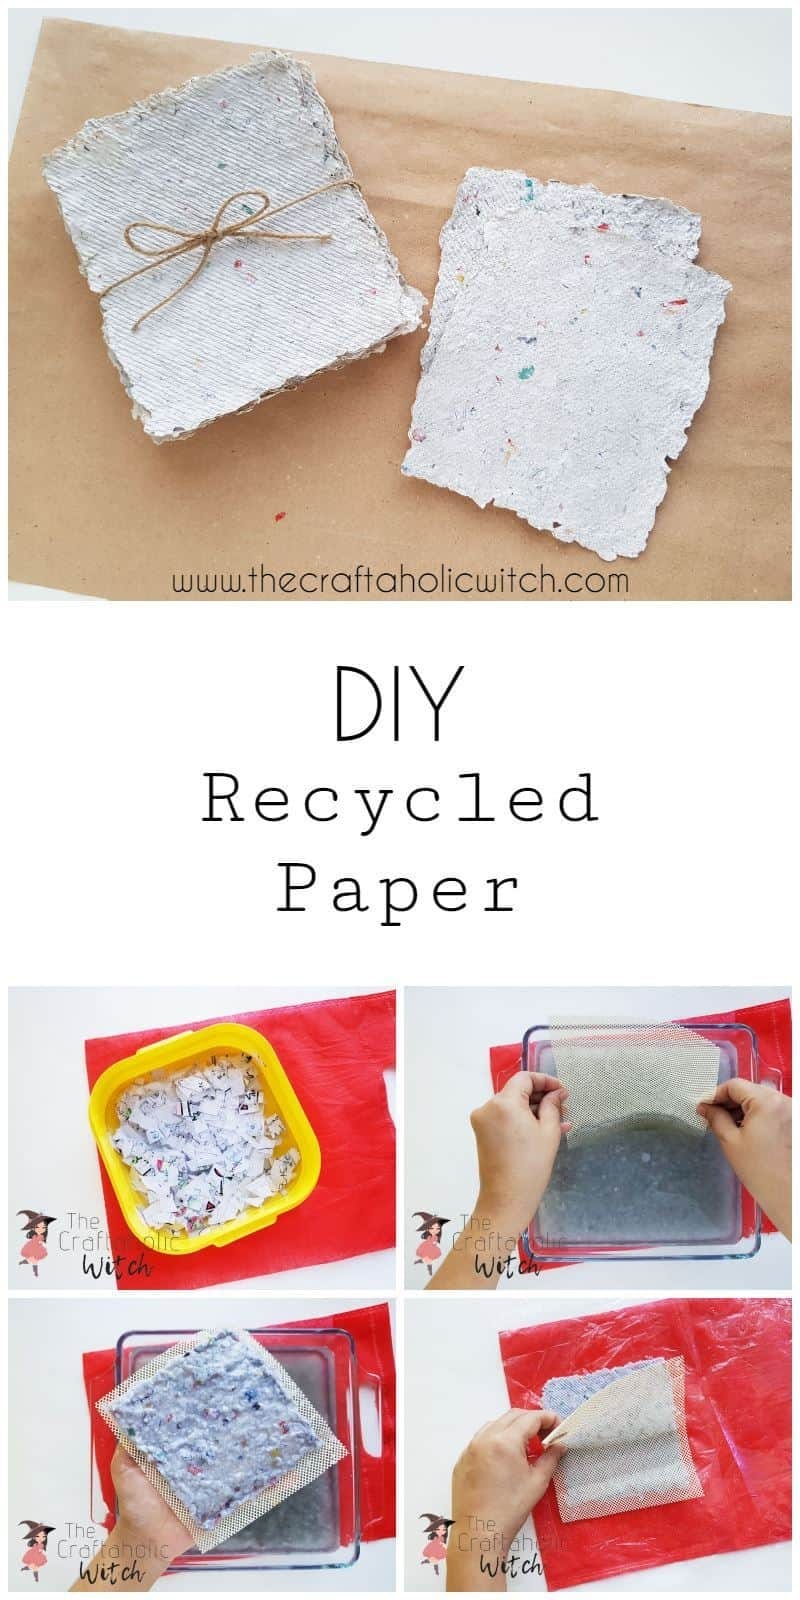 DIY recycled paper: How to Make Paper at Home